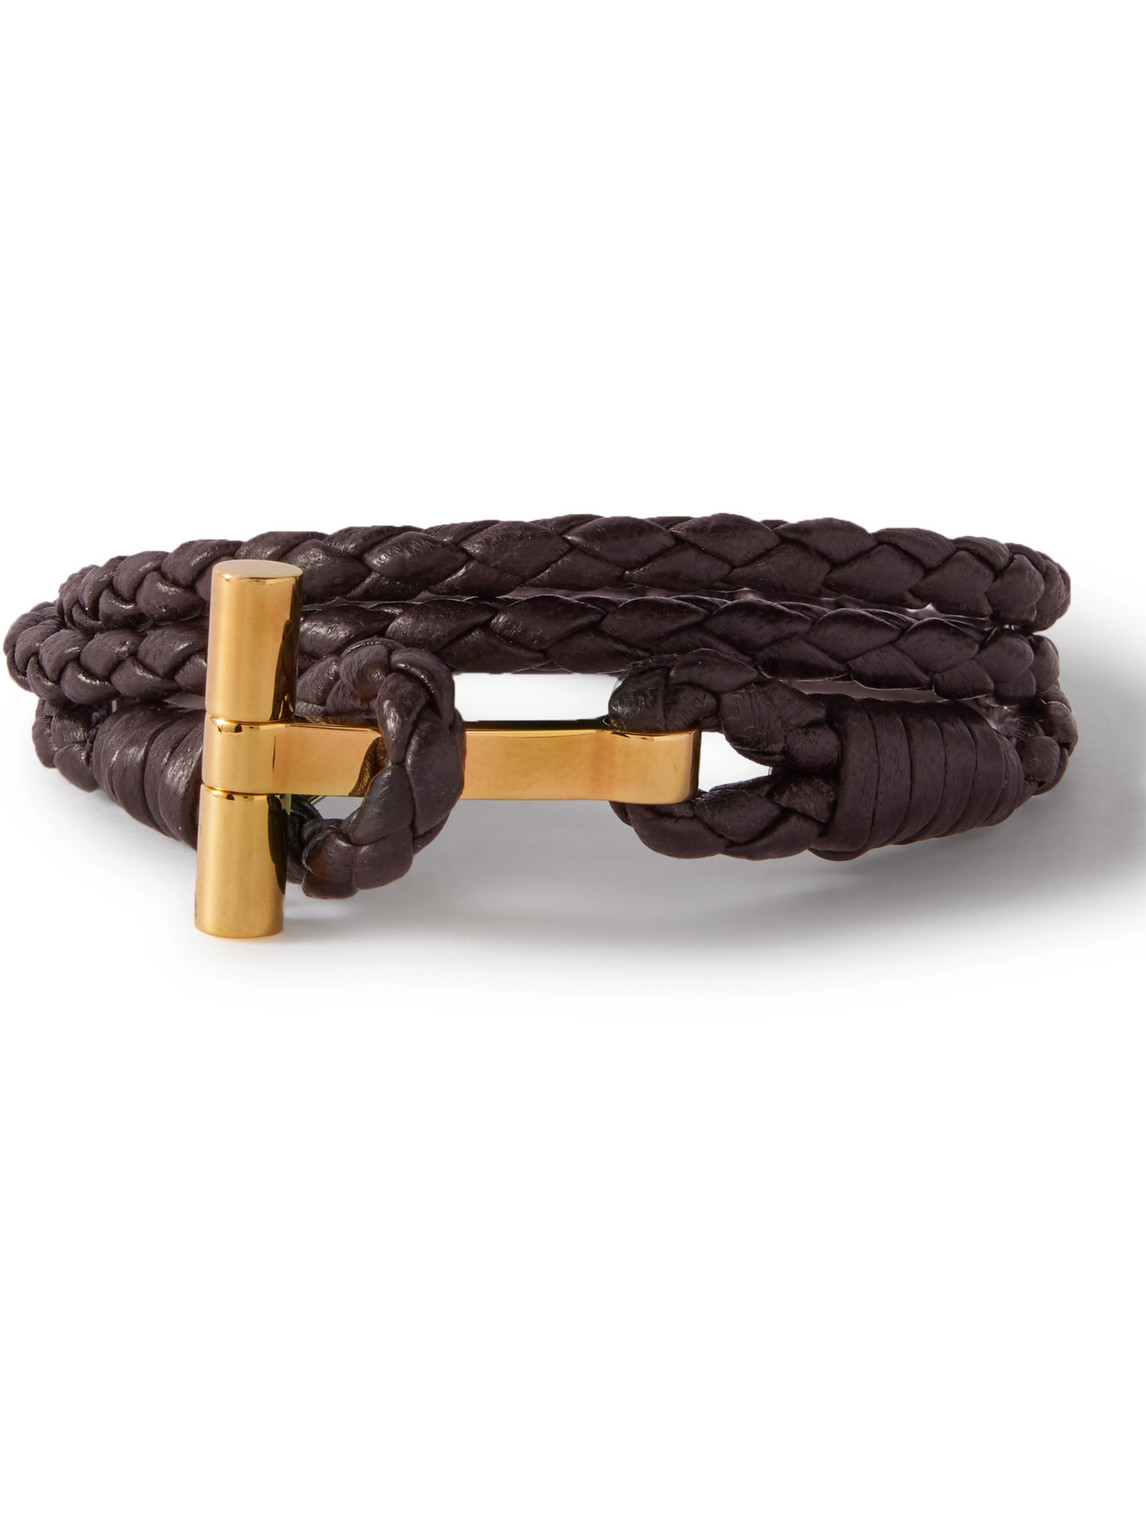 Woven Leather and Gold-Plated Wrap Bracelet